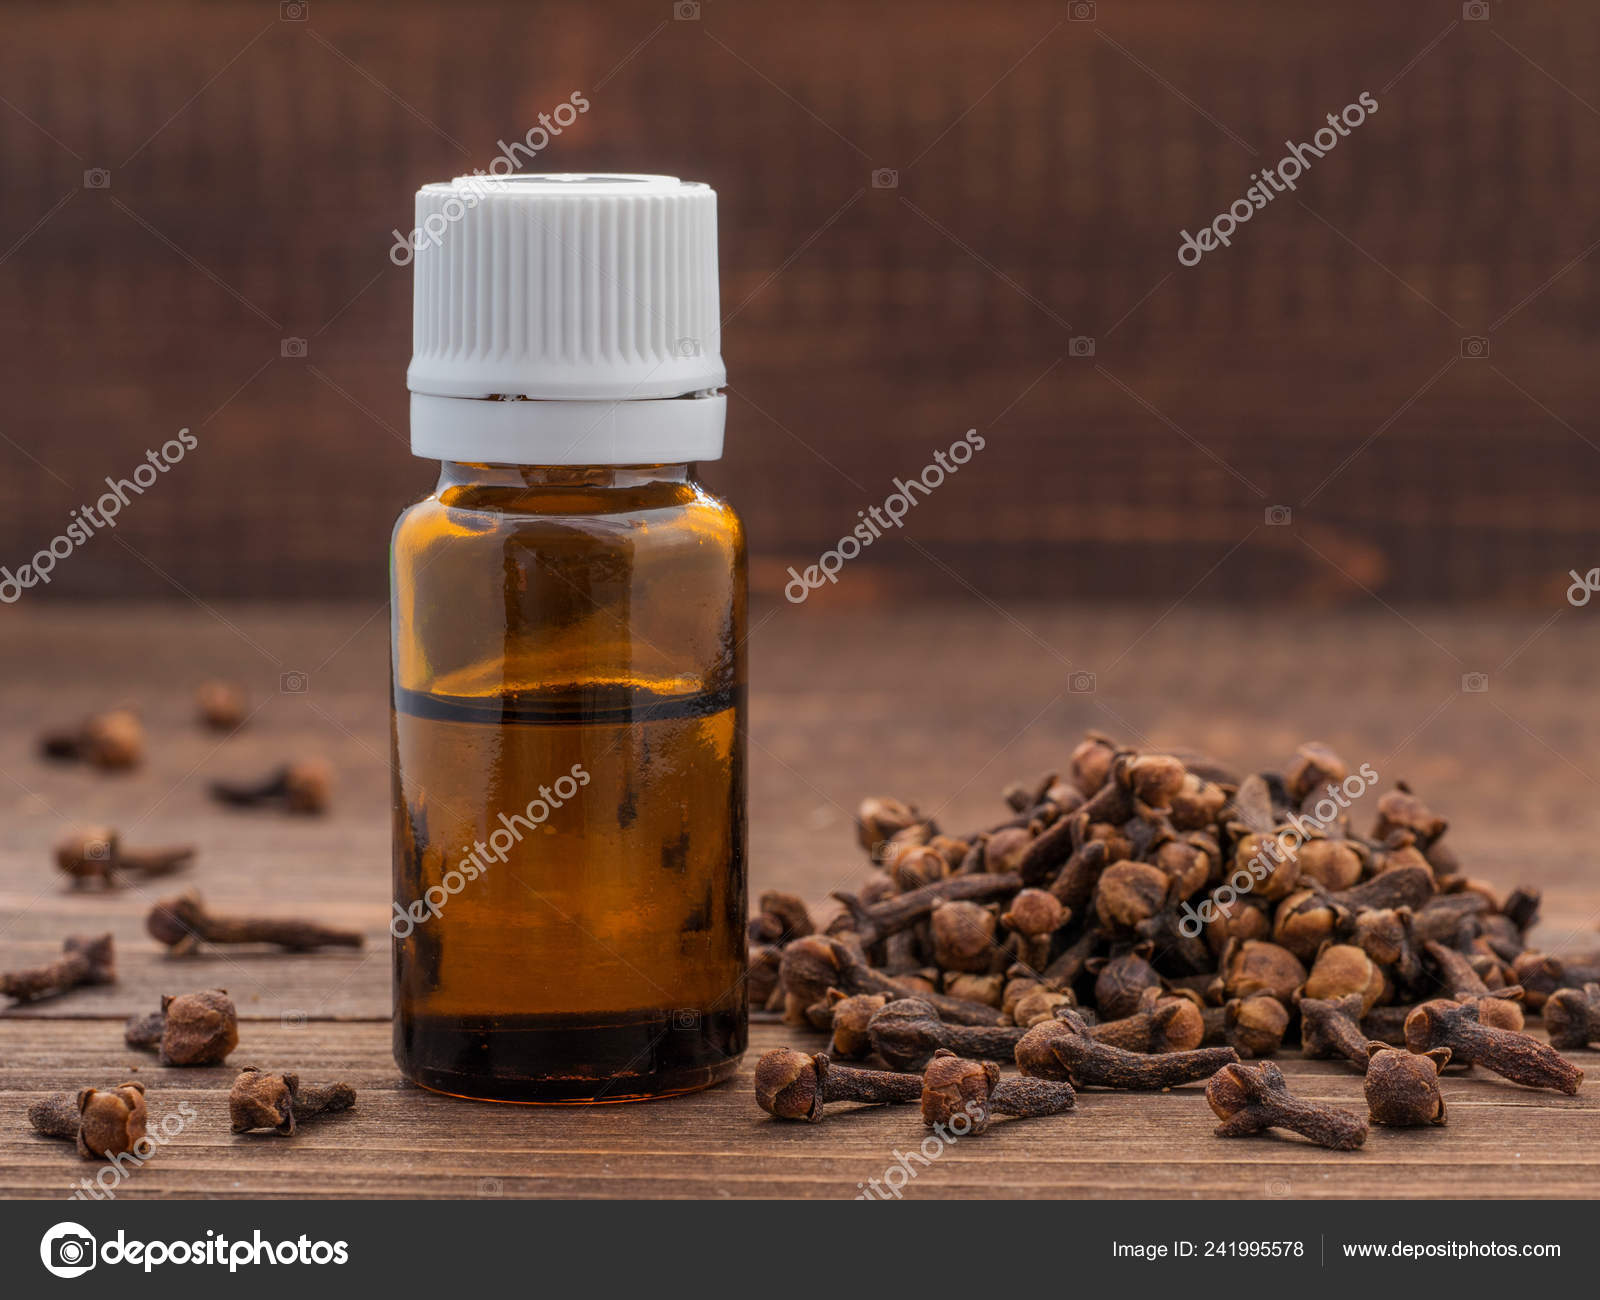 Clove essential oil young living